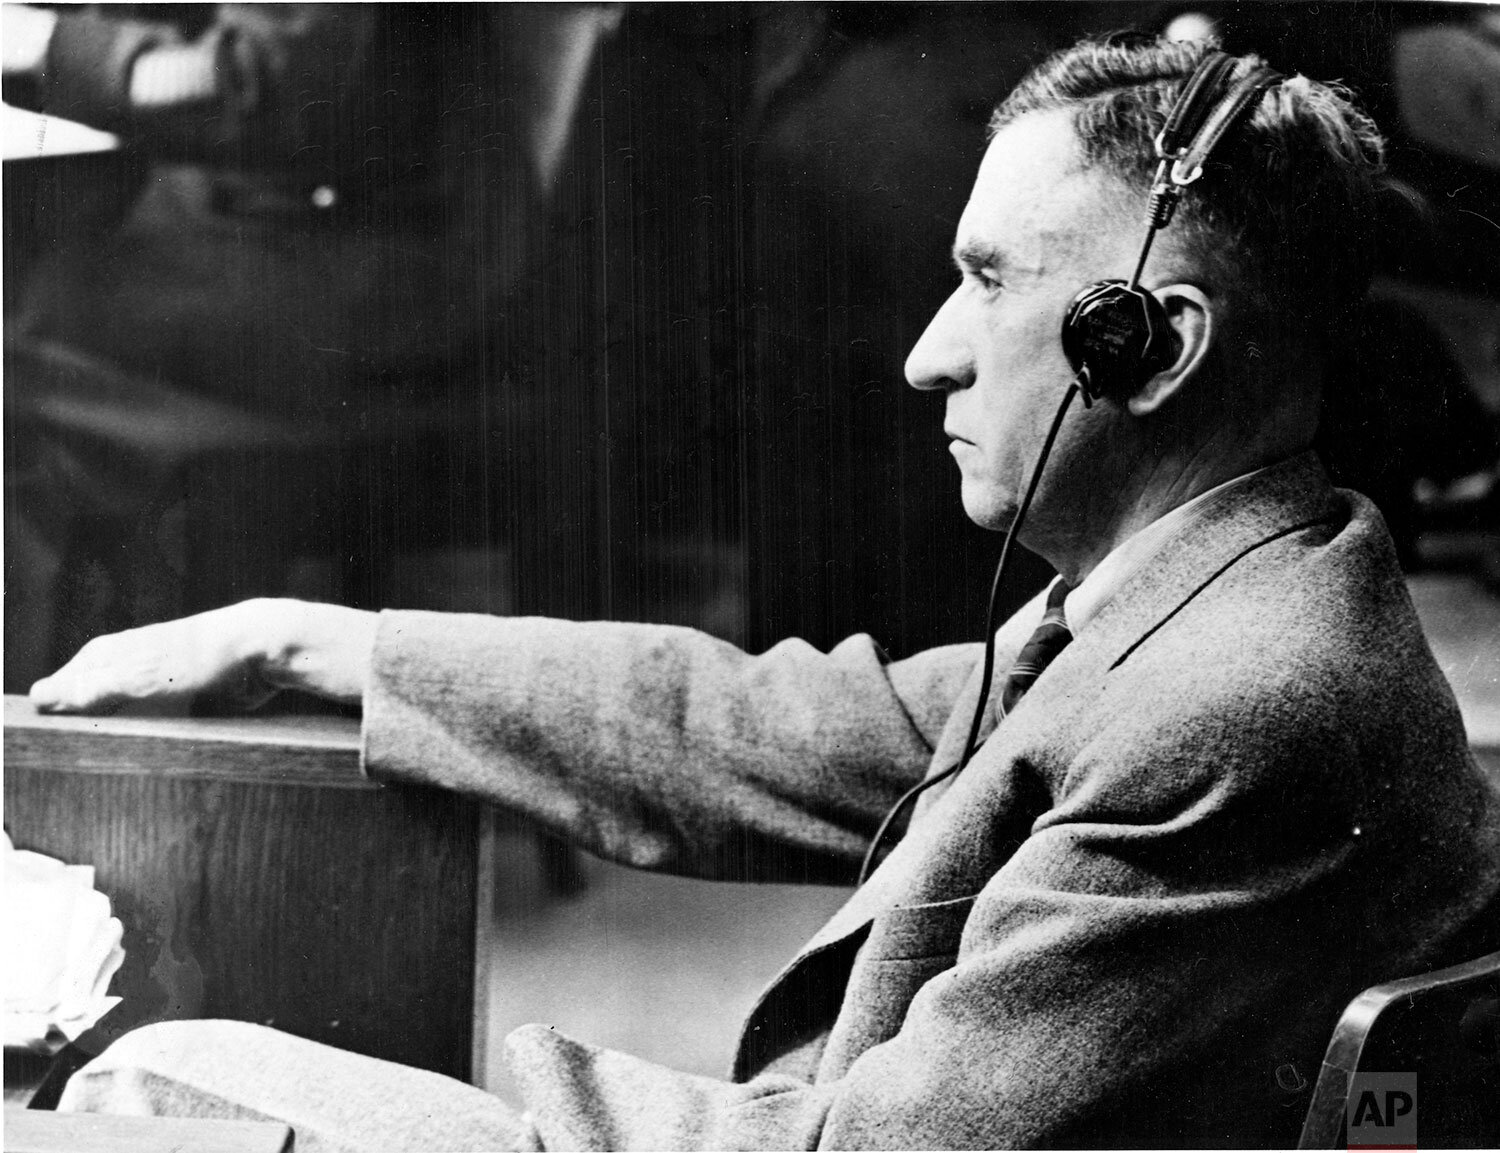  Carl Krauch, the main defendant of case 6 and former chairman of the managing board of directors of the I.G. Farben Cemical Industries, takes the stand to testify in his own defense at the U.S. Military Tribunal in Nuremberg, Germany, January 13, 19